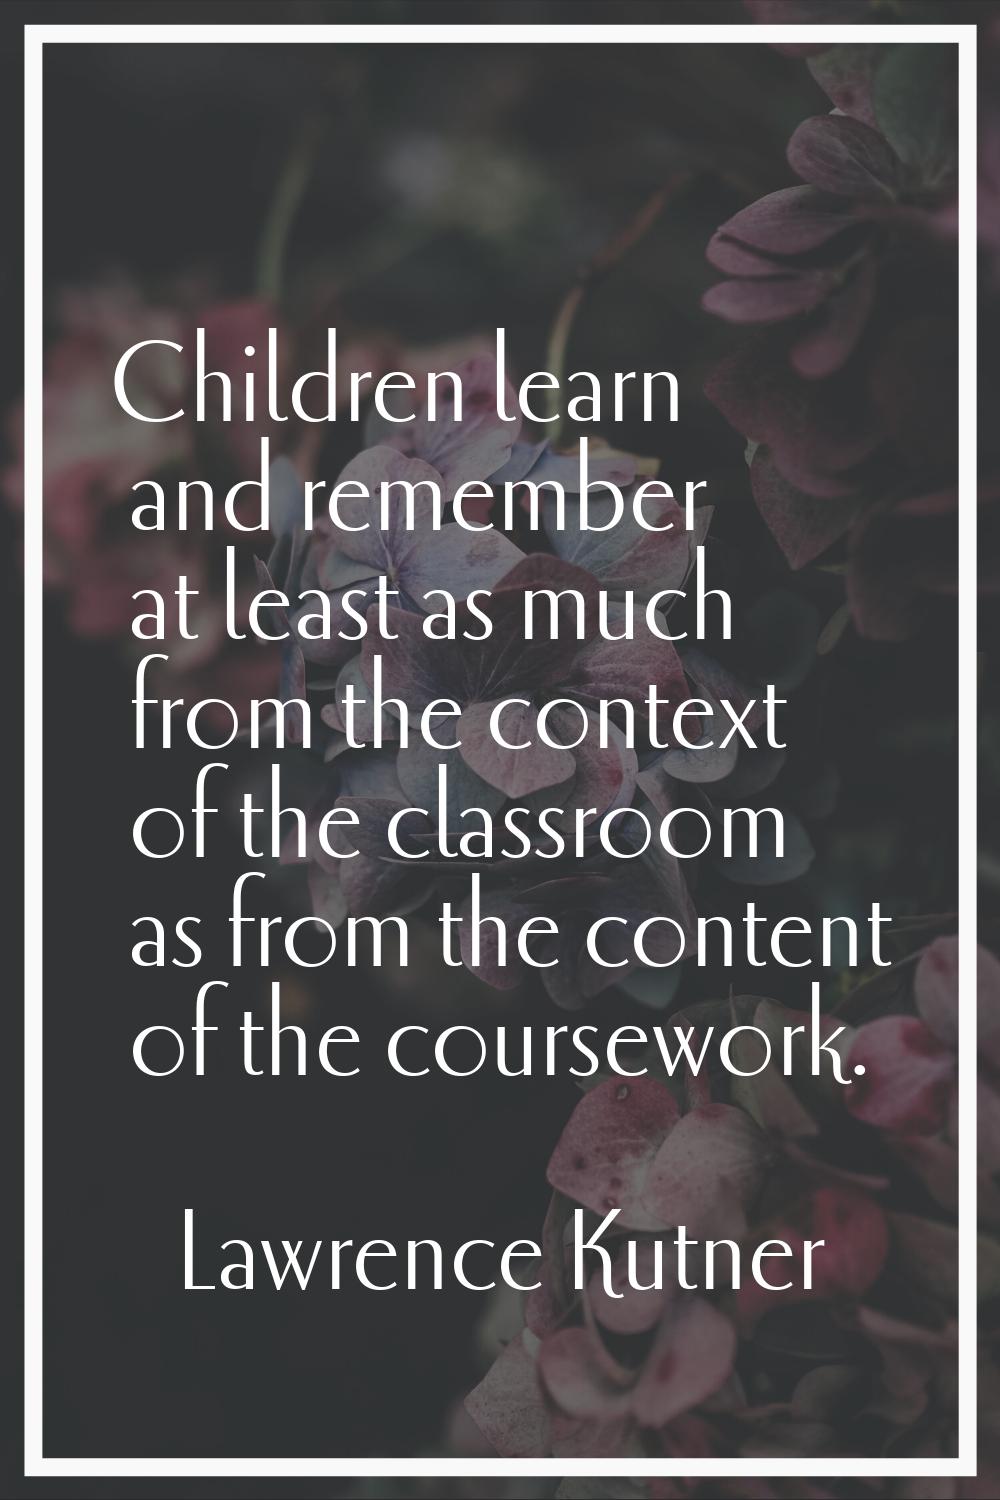 Children learn and remember at least as much from the context of the classroom as from the content 